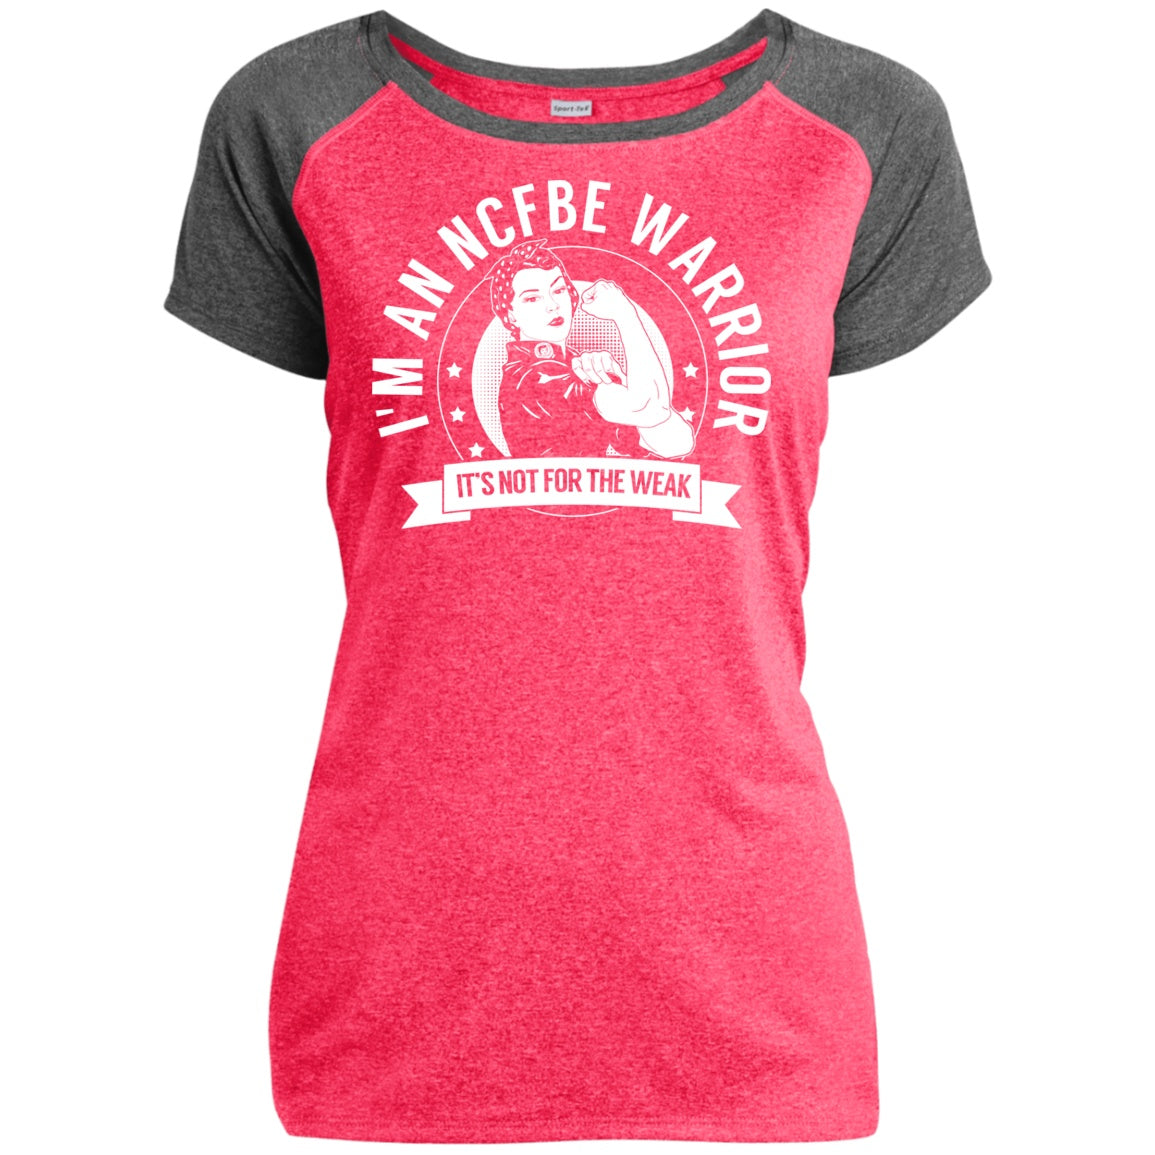 Non-cystic fibrosis bronchiectasis -  NCFBE Warrior NFTW Heather Performance T-Shirt - The Unchargeables